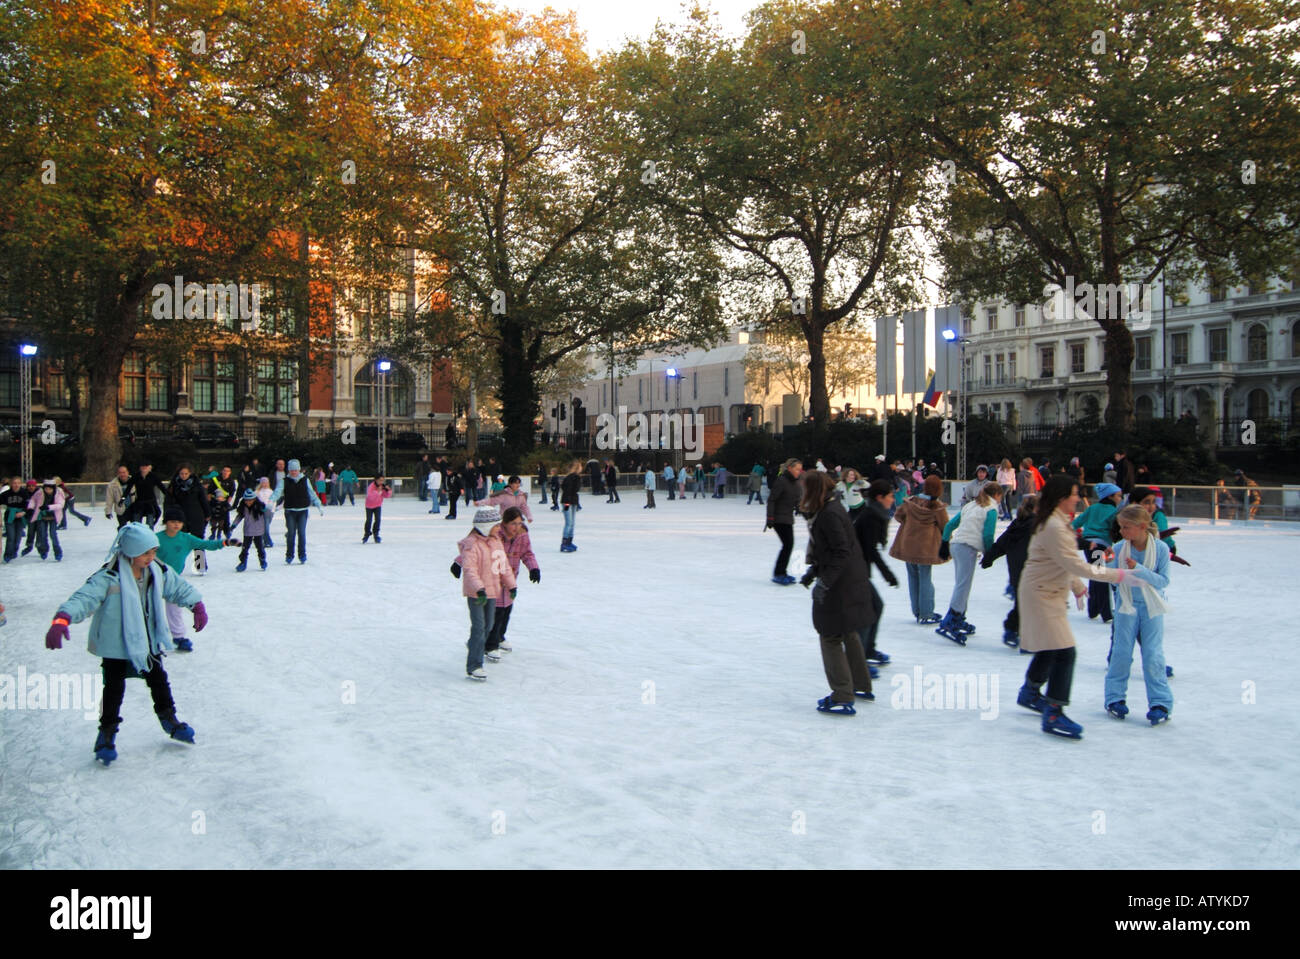 Adults children & kids on ice skates at Christmas winter ice skating rink at Natural History Museum building South Kensington West London England UK Stock Photo